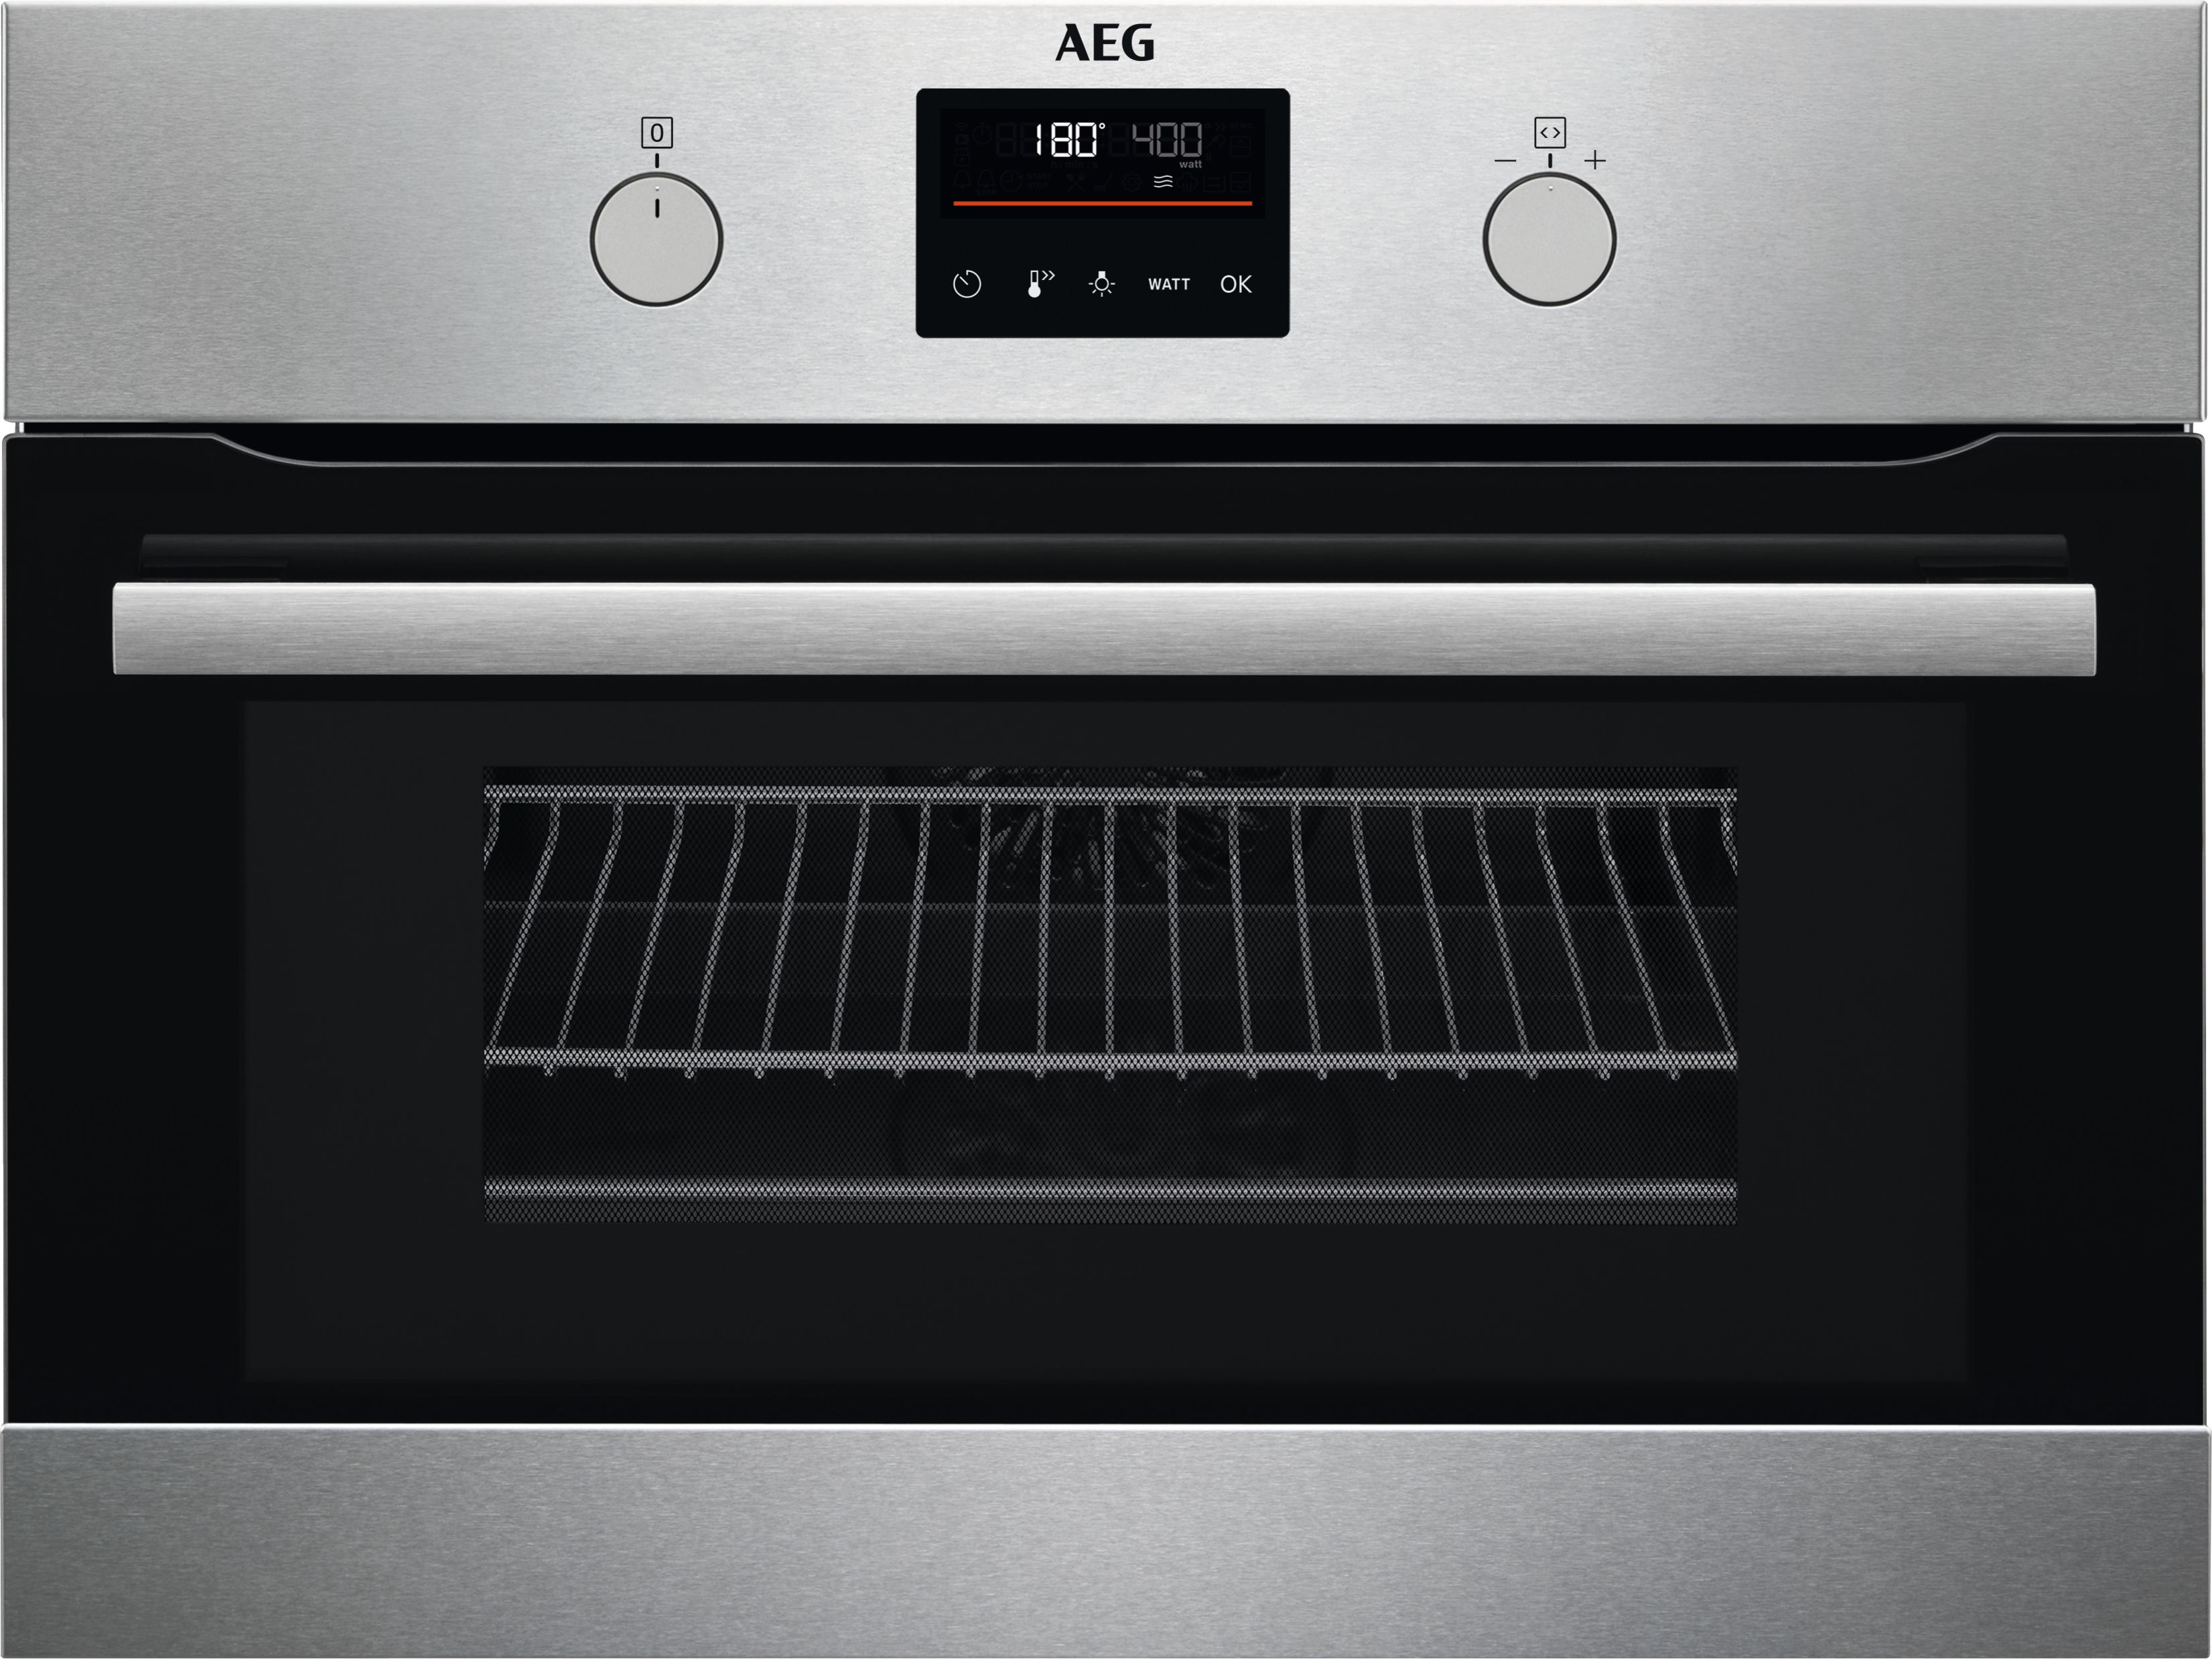 AEG 800 COMBIQUICK KMK365060M 46cm tall, 60cm wide, Built In Microwave - Stainless Steel, Stainless Steel